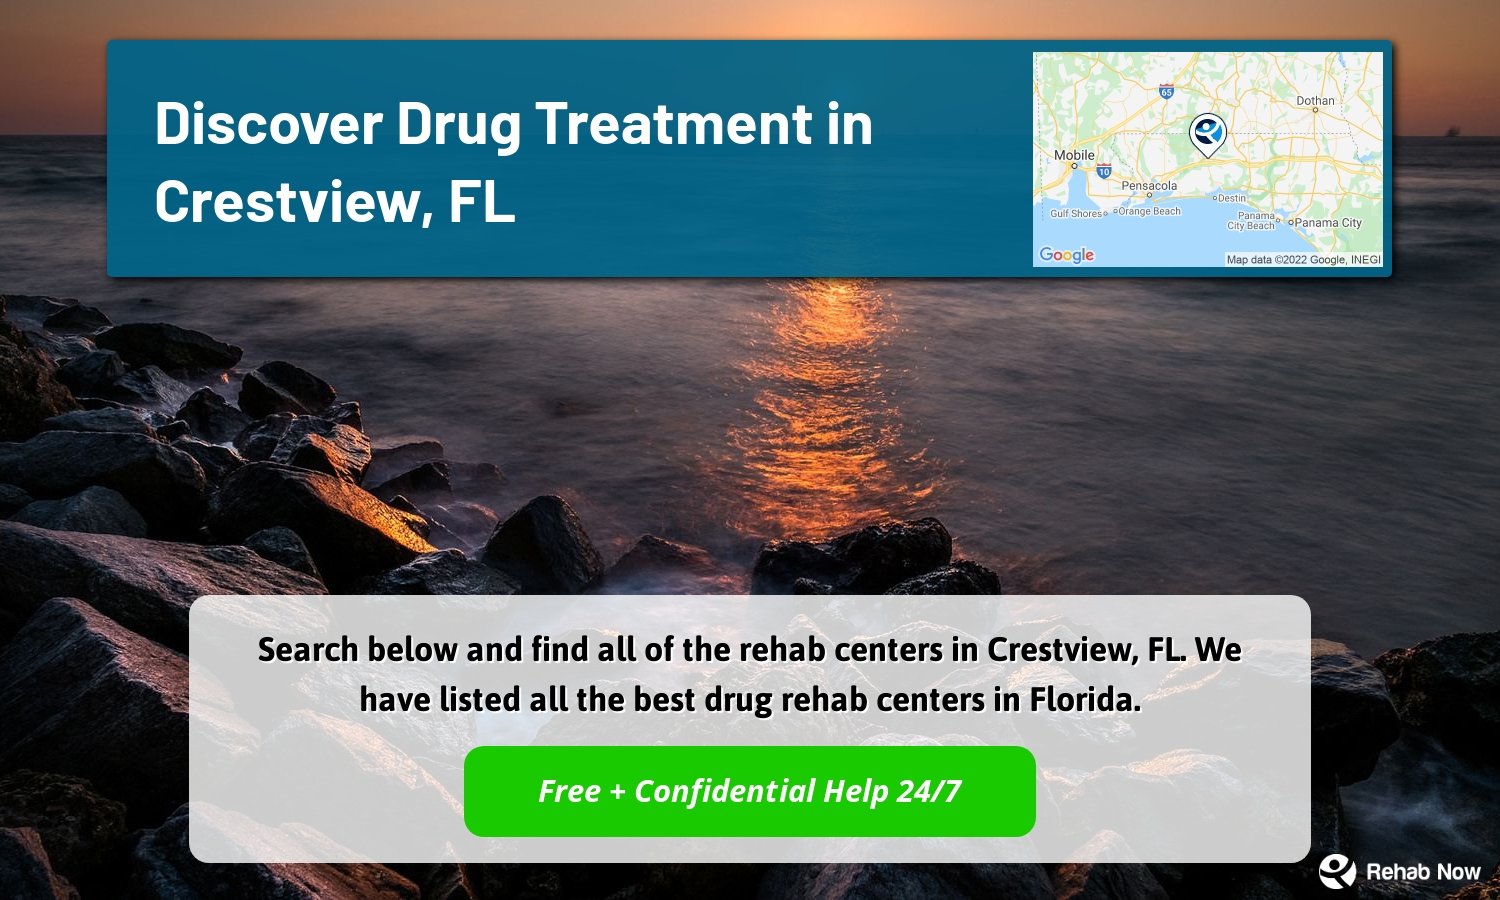 Search below and find all of the rehab centers in Crestview, FL. We have listed all the best drug rehab centers in Florida.